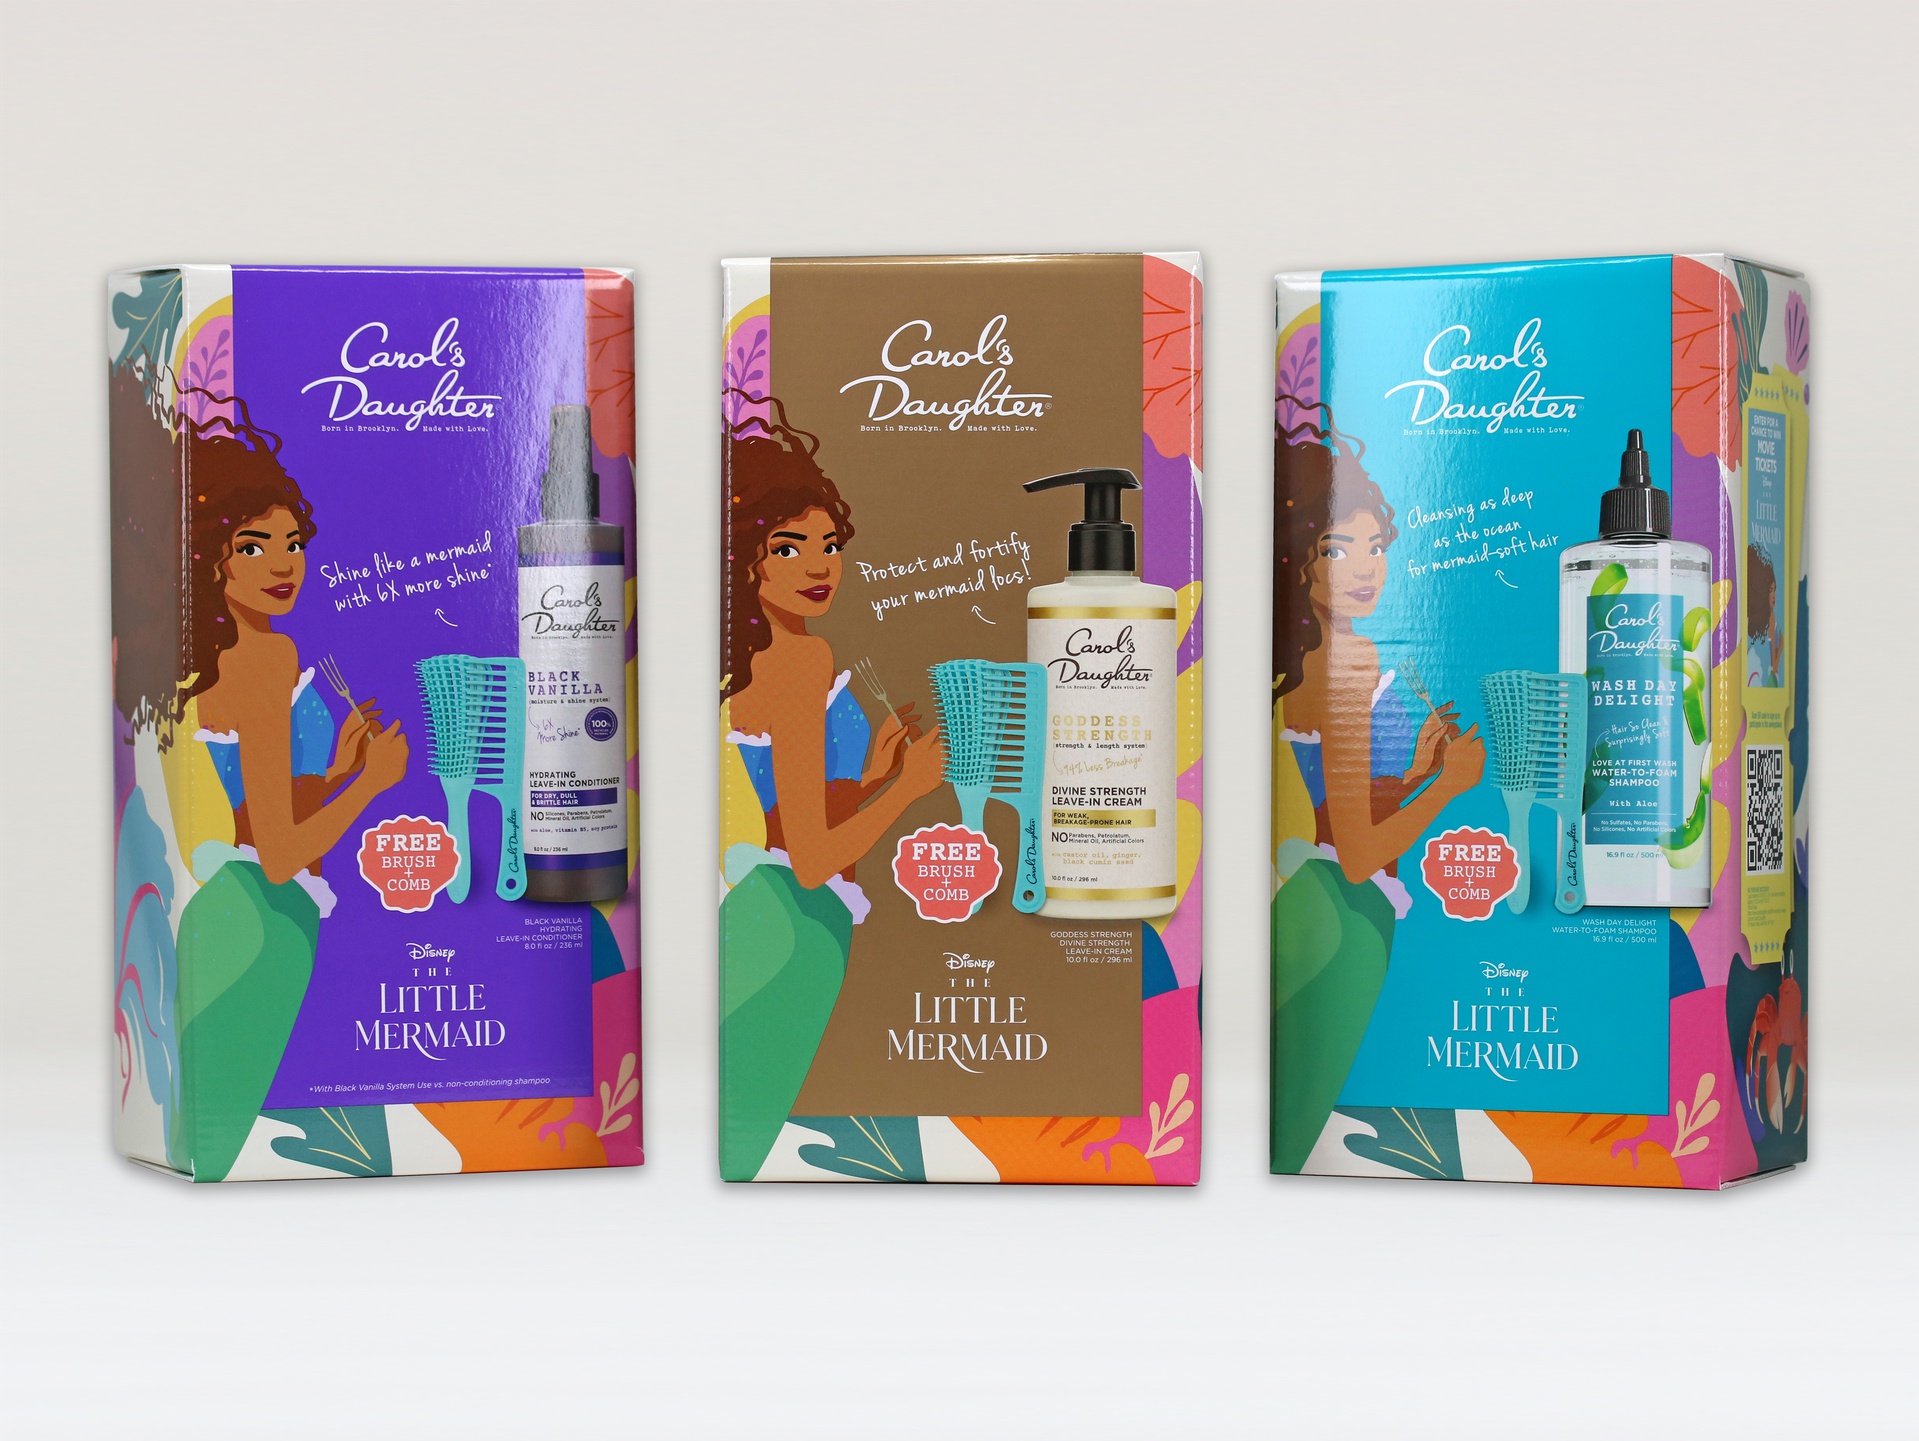 Carol's Daughter limited edition packaging for Disney's The Little Mermaid